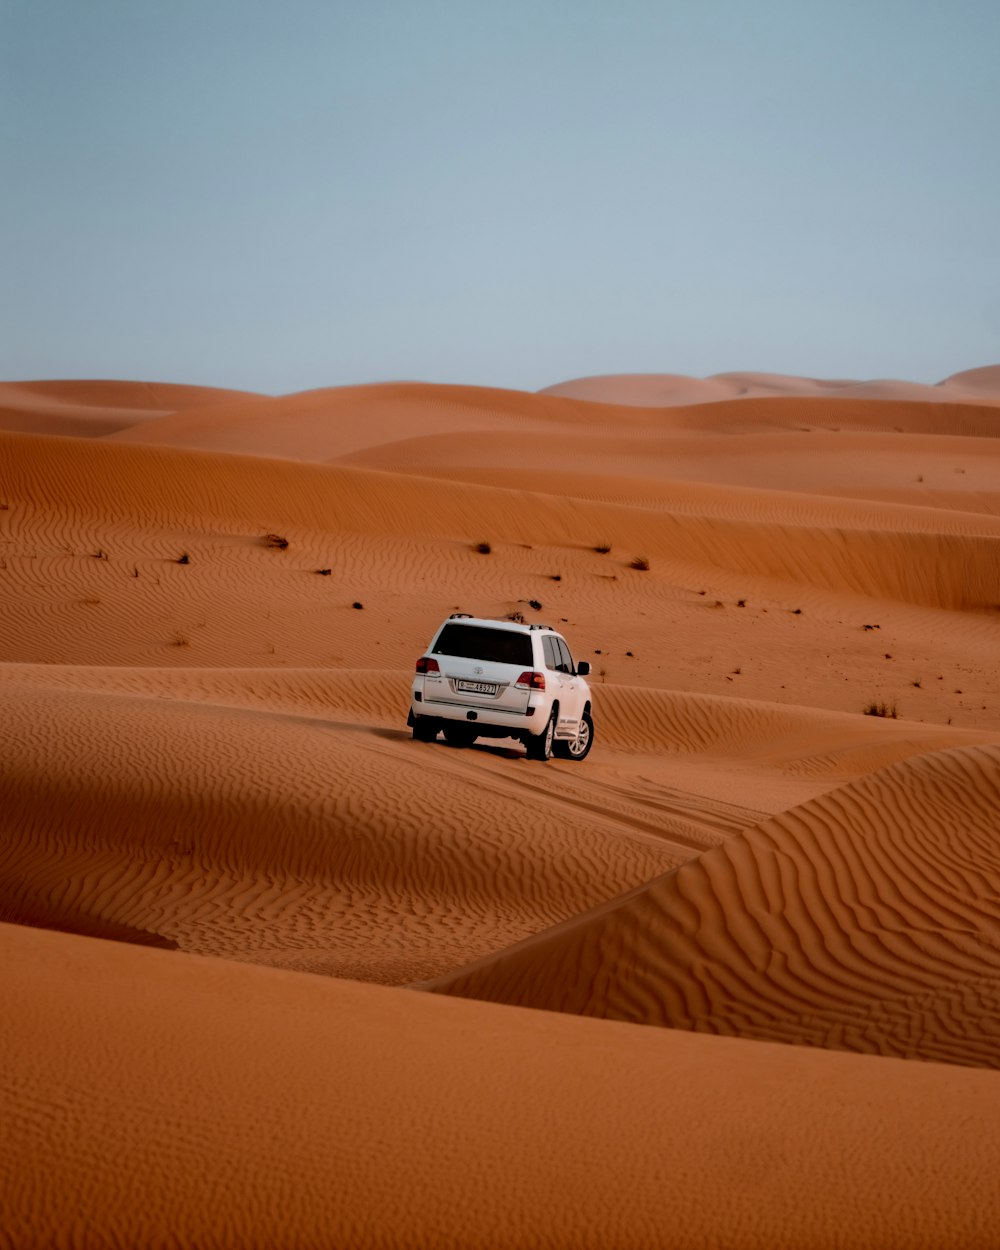 a van driving through the desert with sand dunes in the background